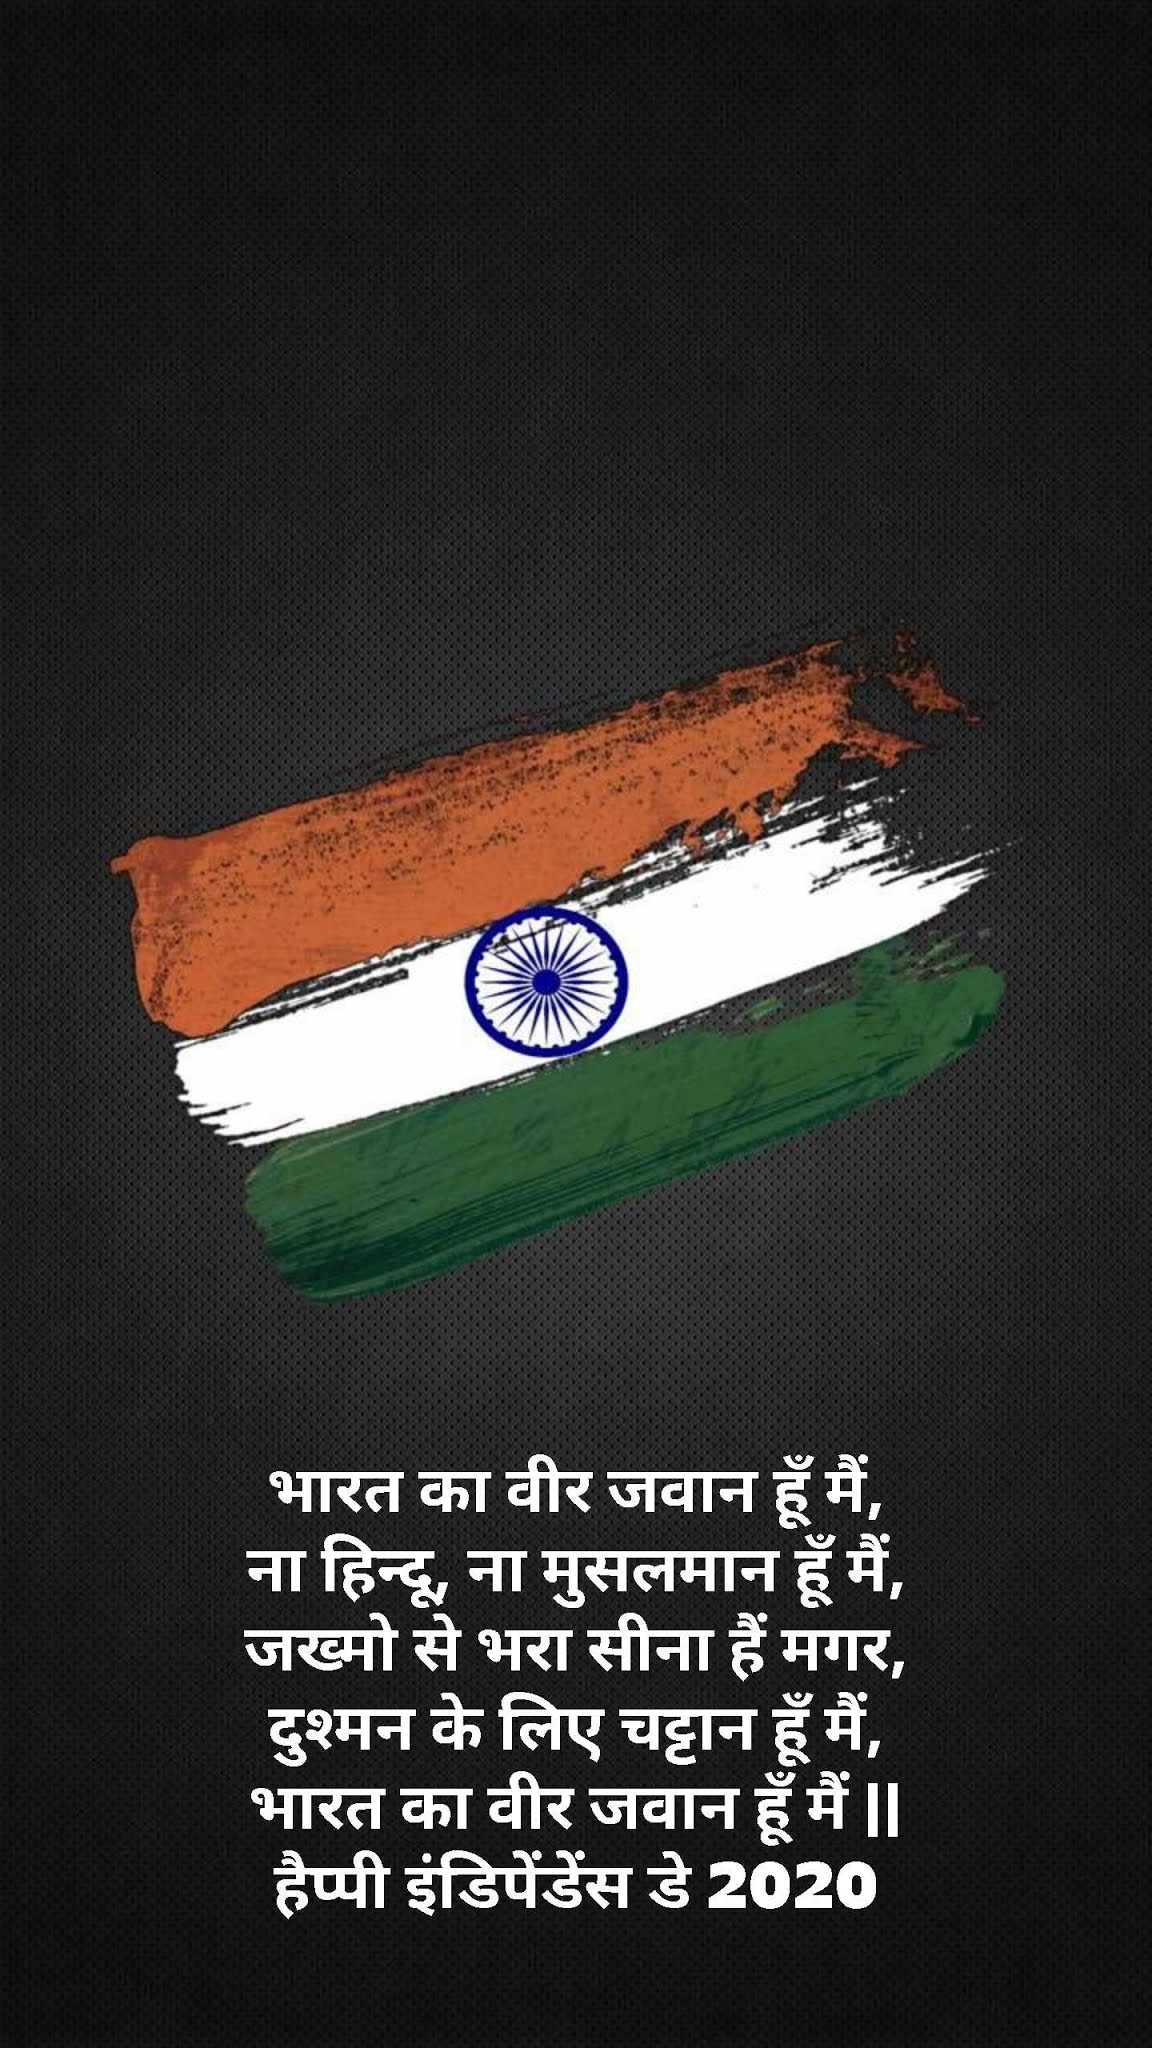 Happy Independence Day Quotes in Hindi Download 2021 | Independence Day Wishes, Messages in Hindi